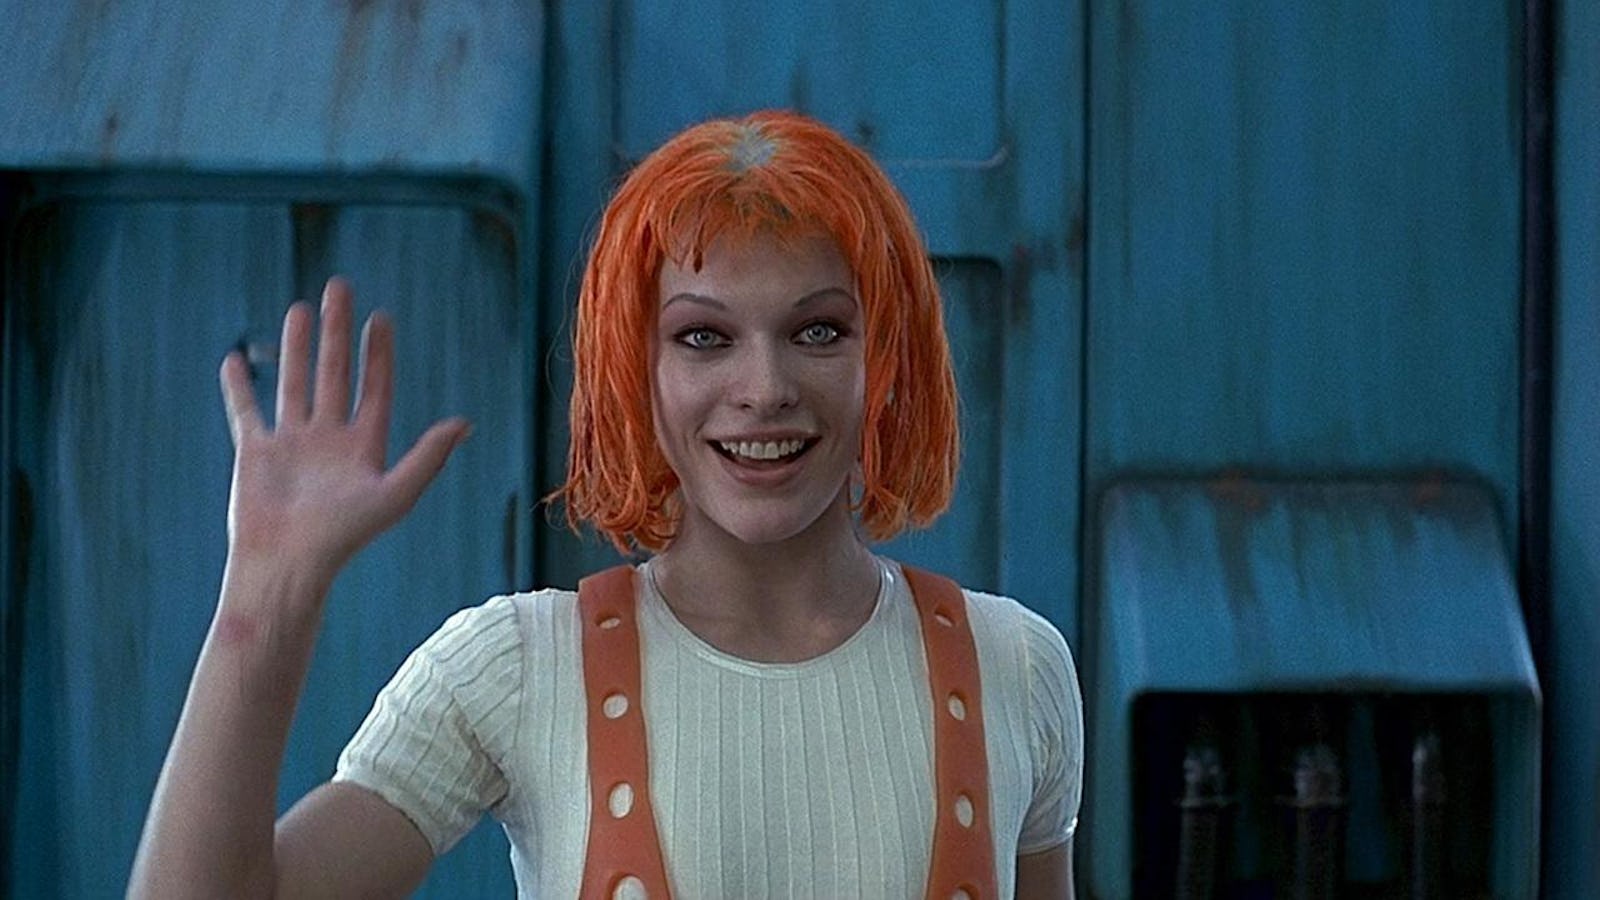 2. "The Fifth Element" (1997) - wide 11